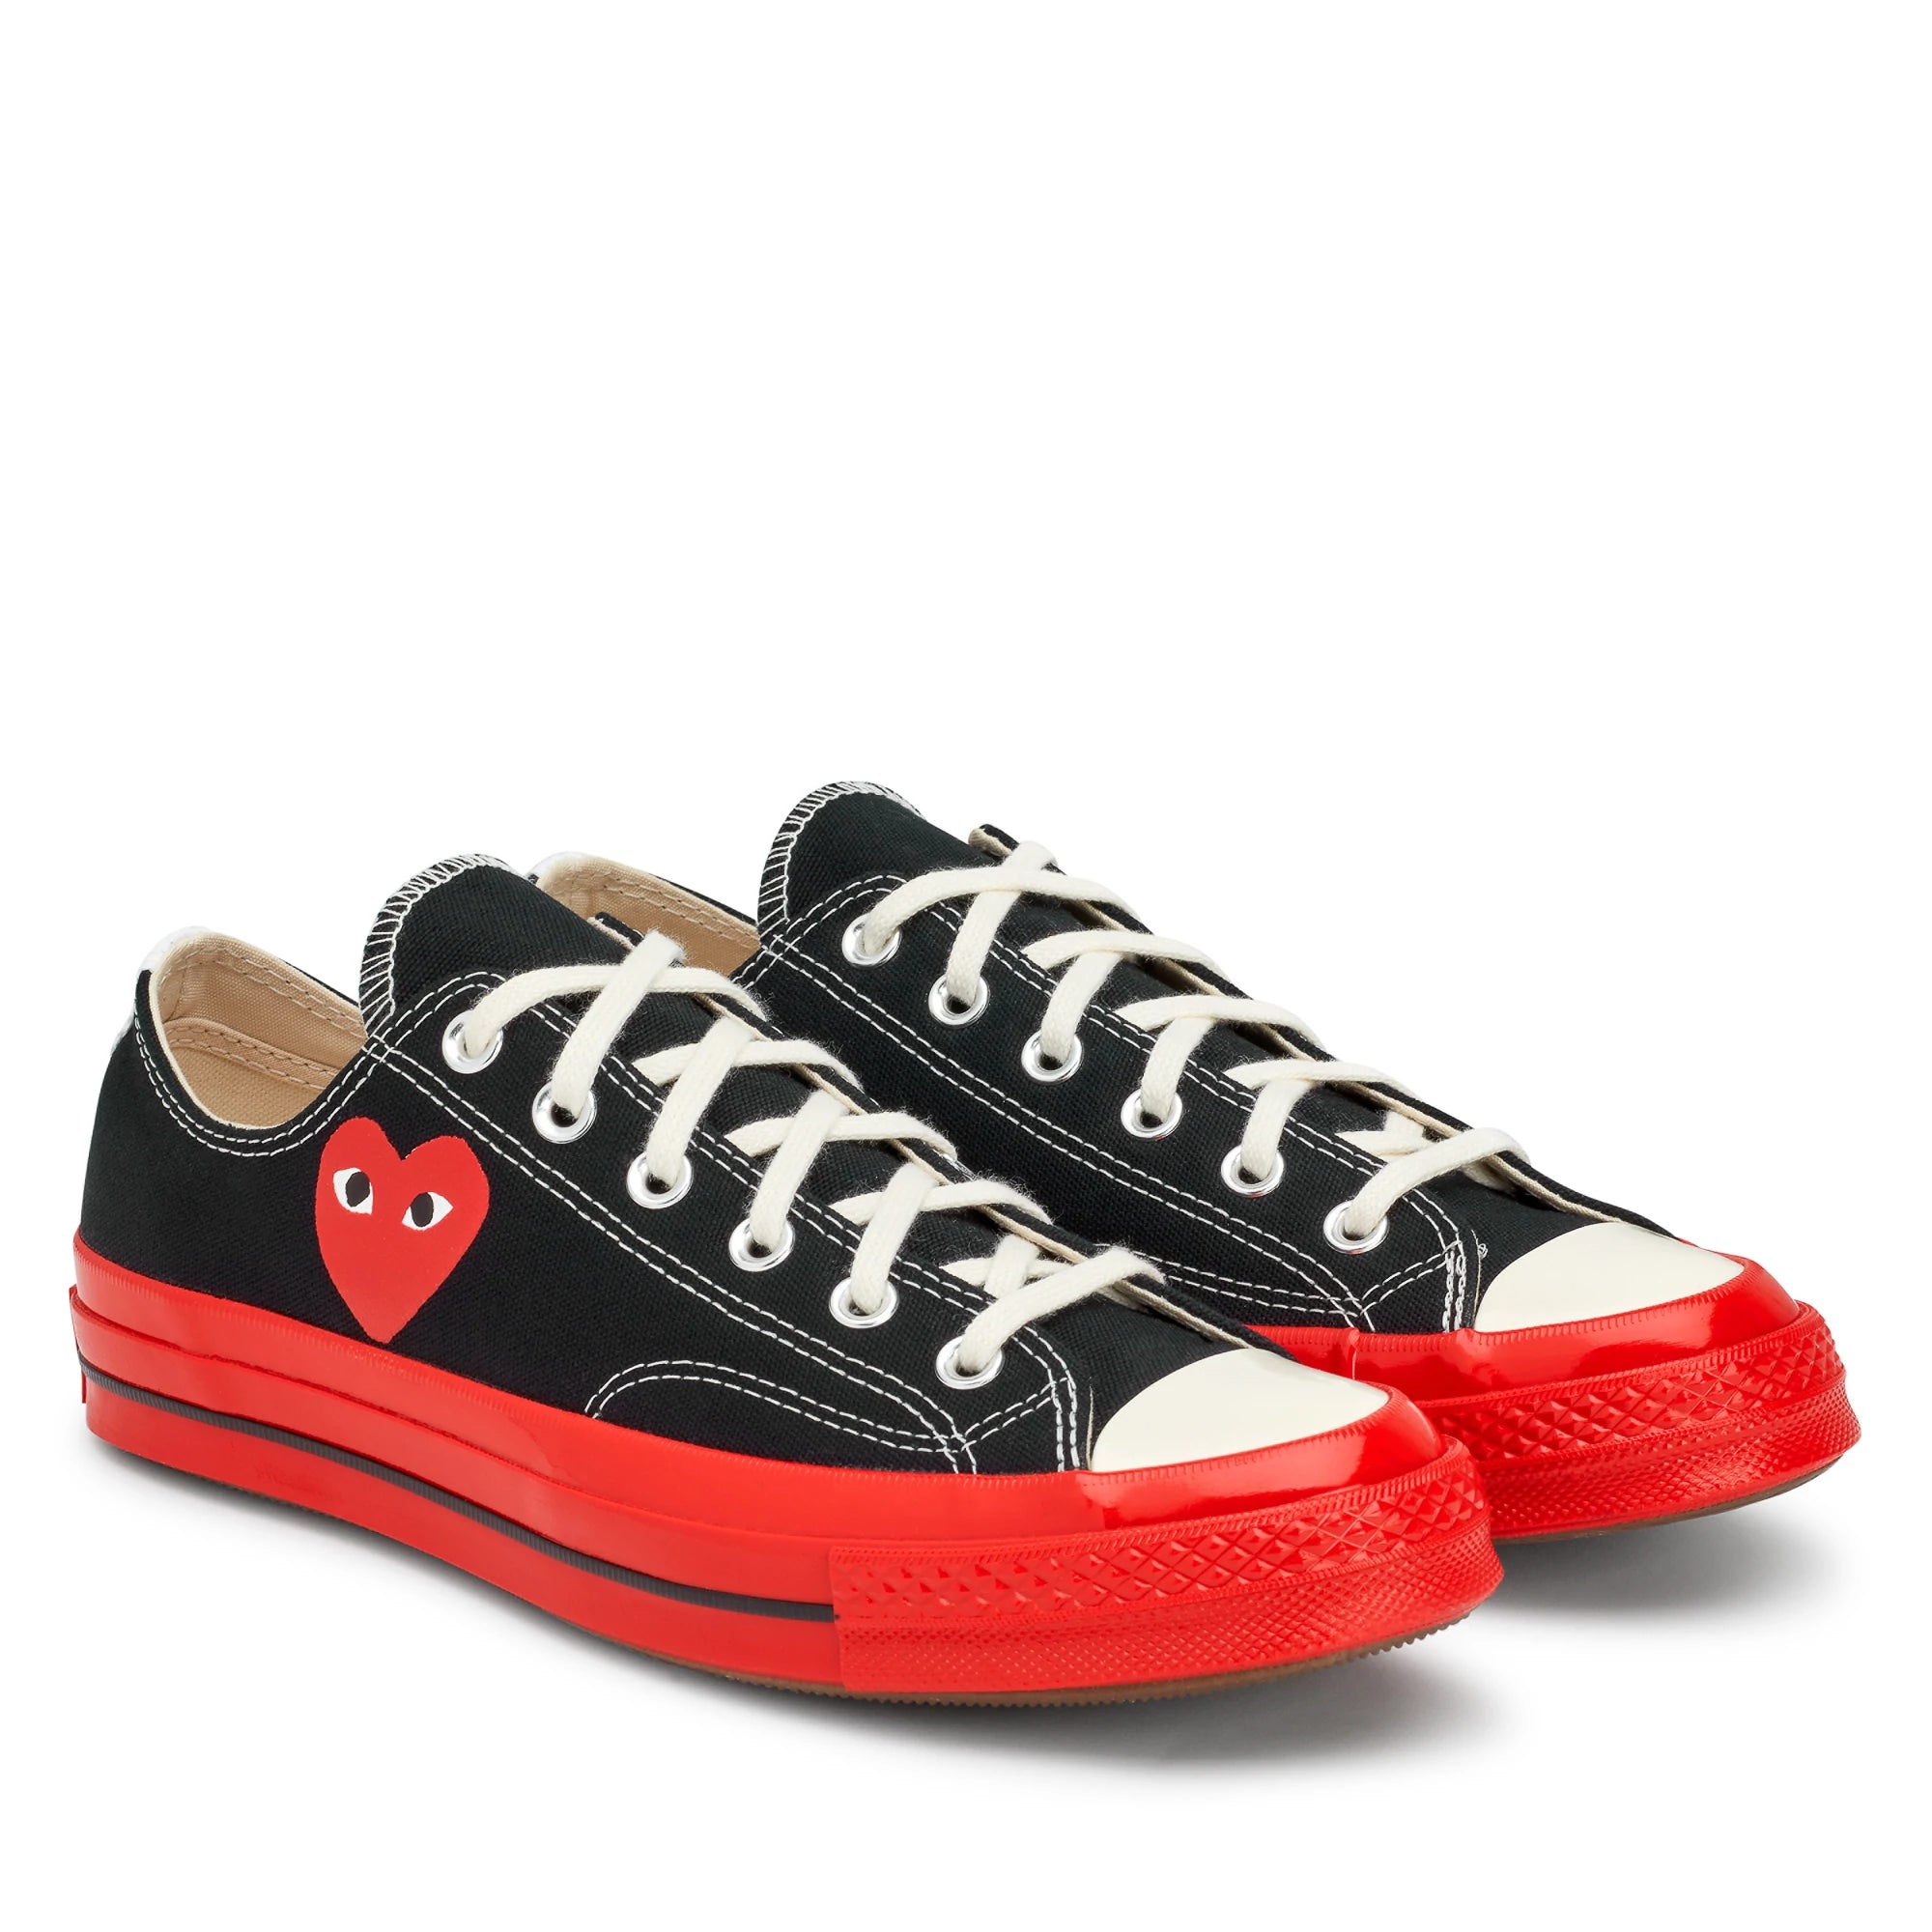 Converse Red Sole Low Top (Black)